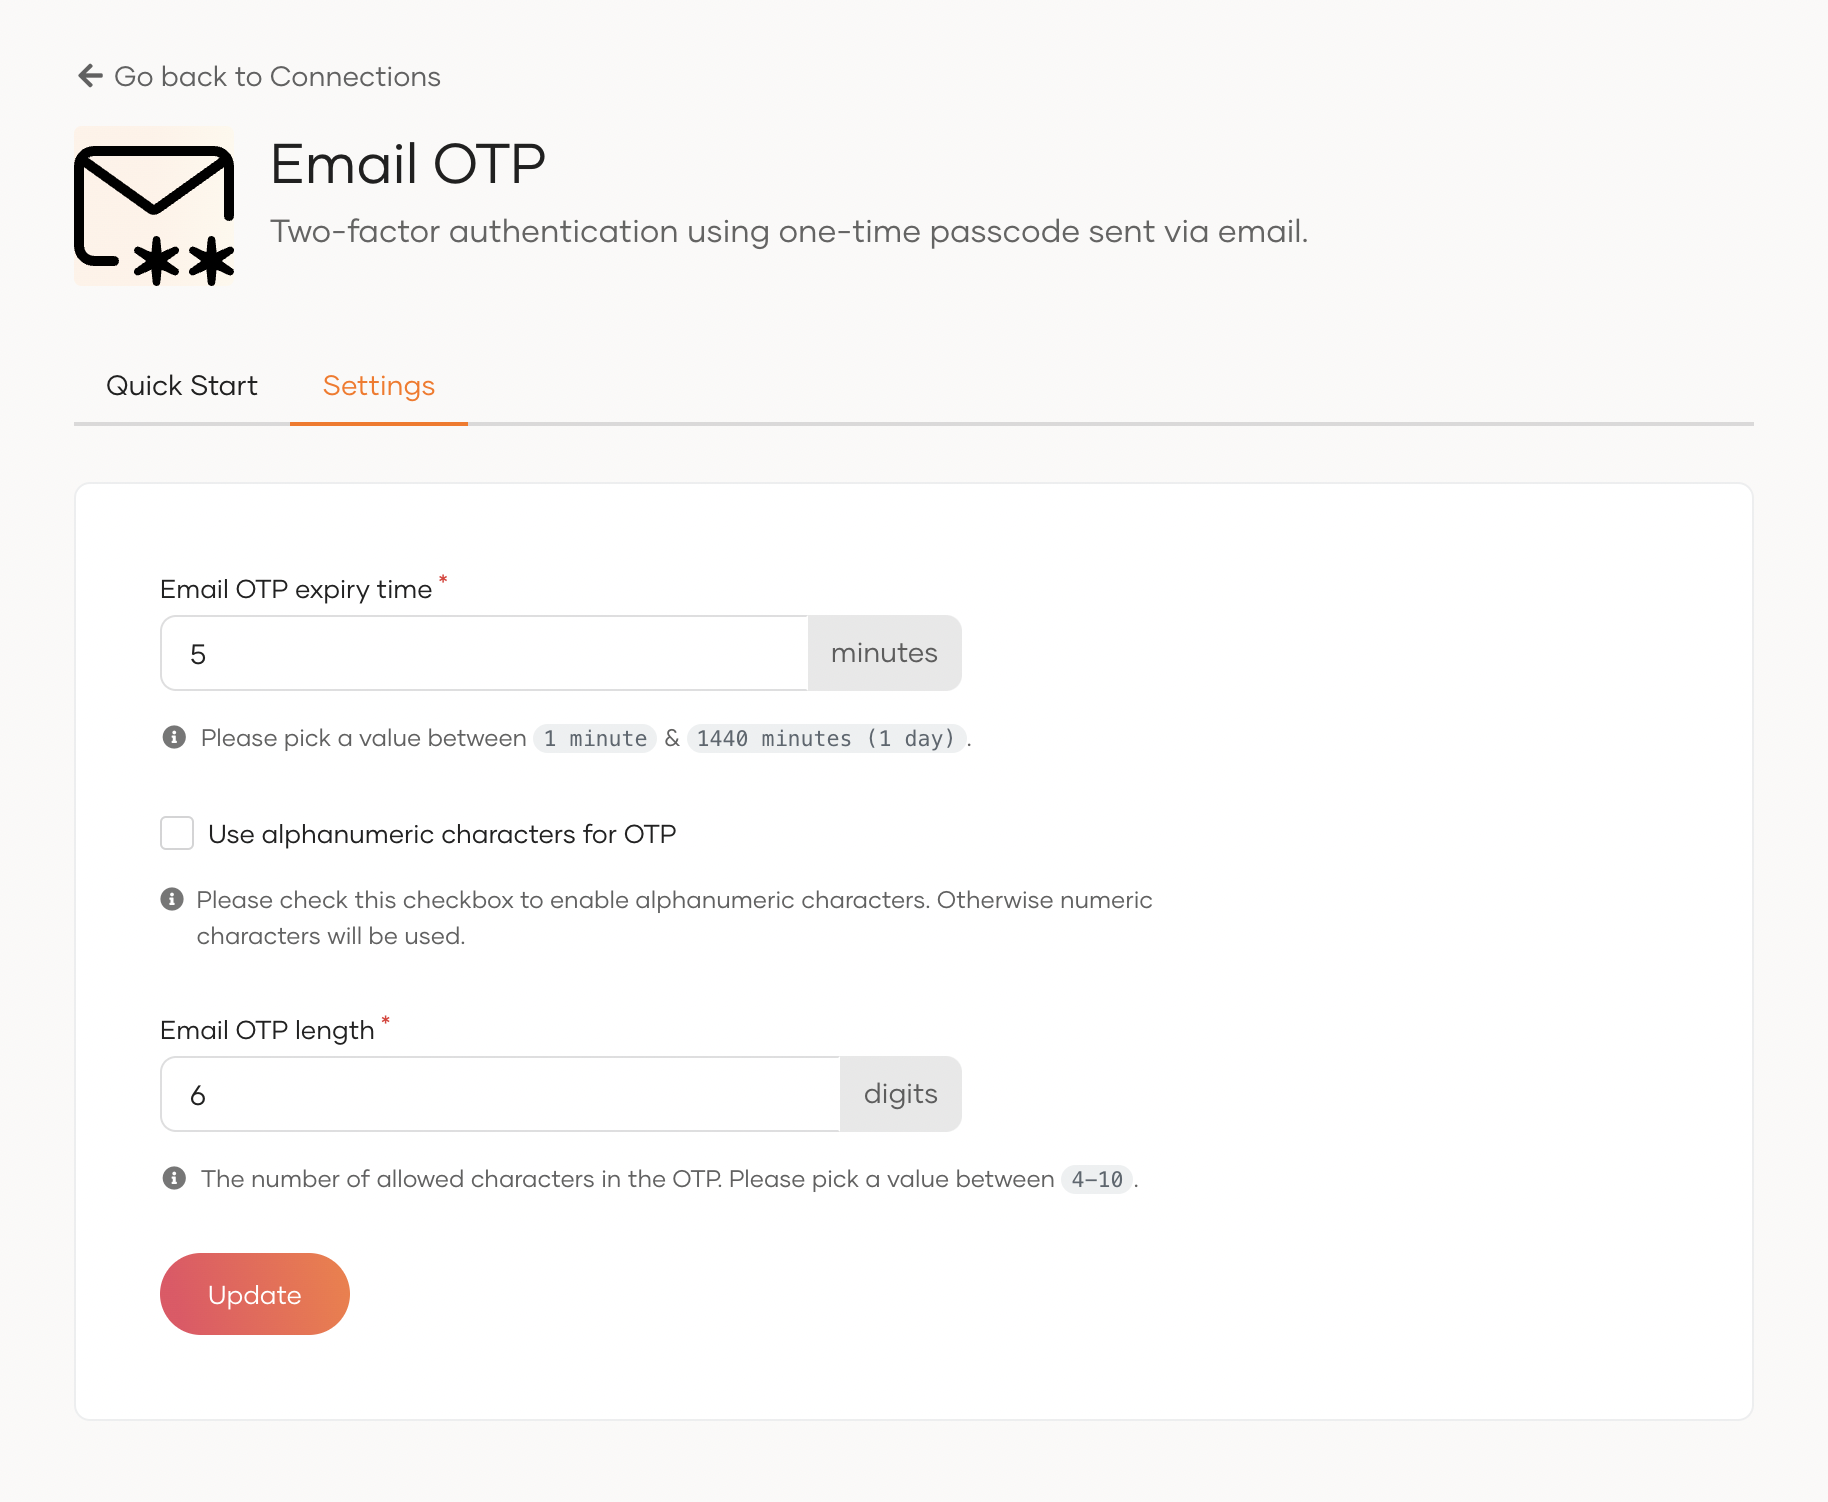 Setup email OTP in Asgardeo